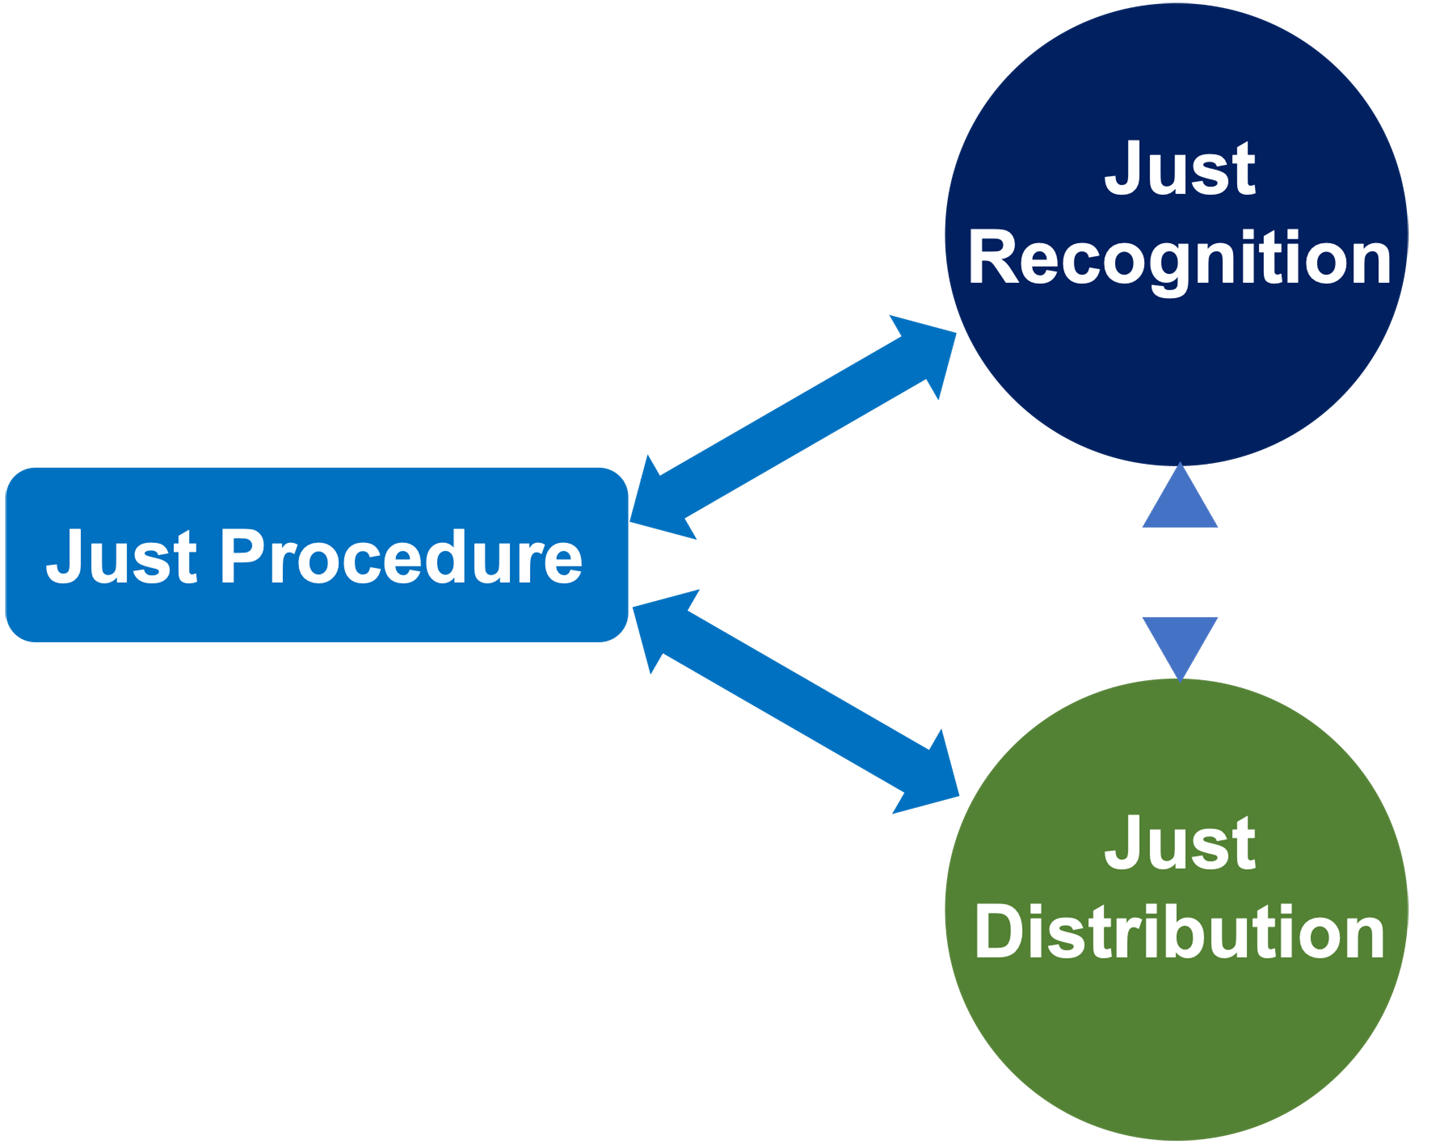 Figure 2. Procedure-Centered Energy Justice Framework for a Sustainable Energy Policy